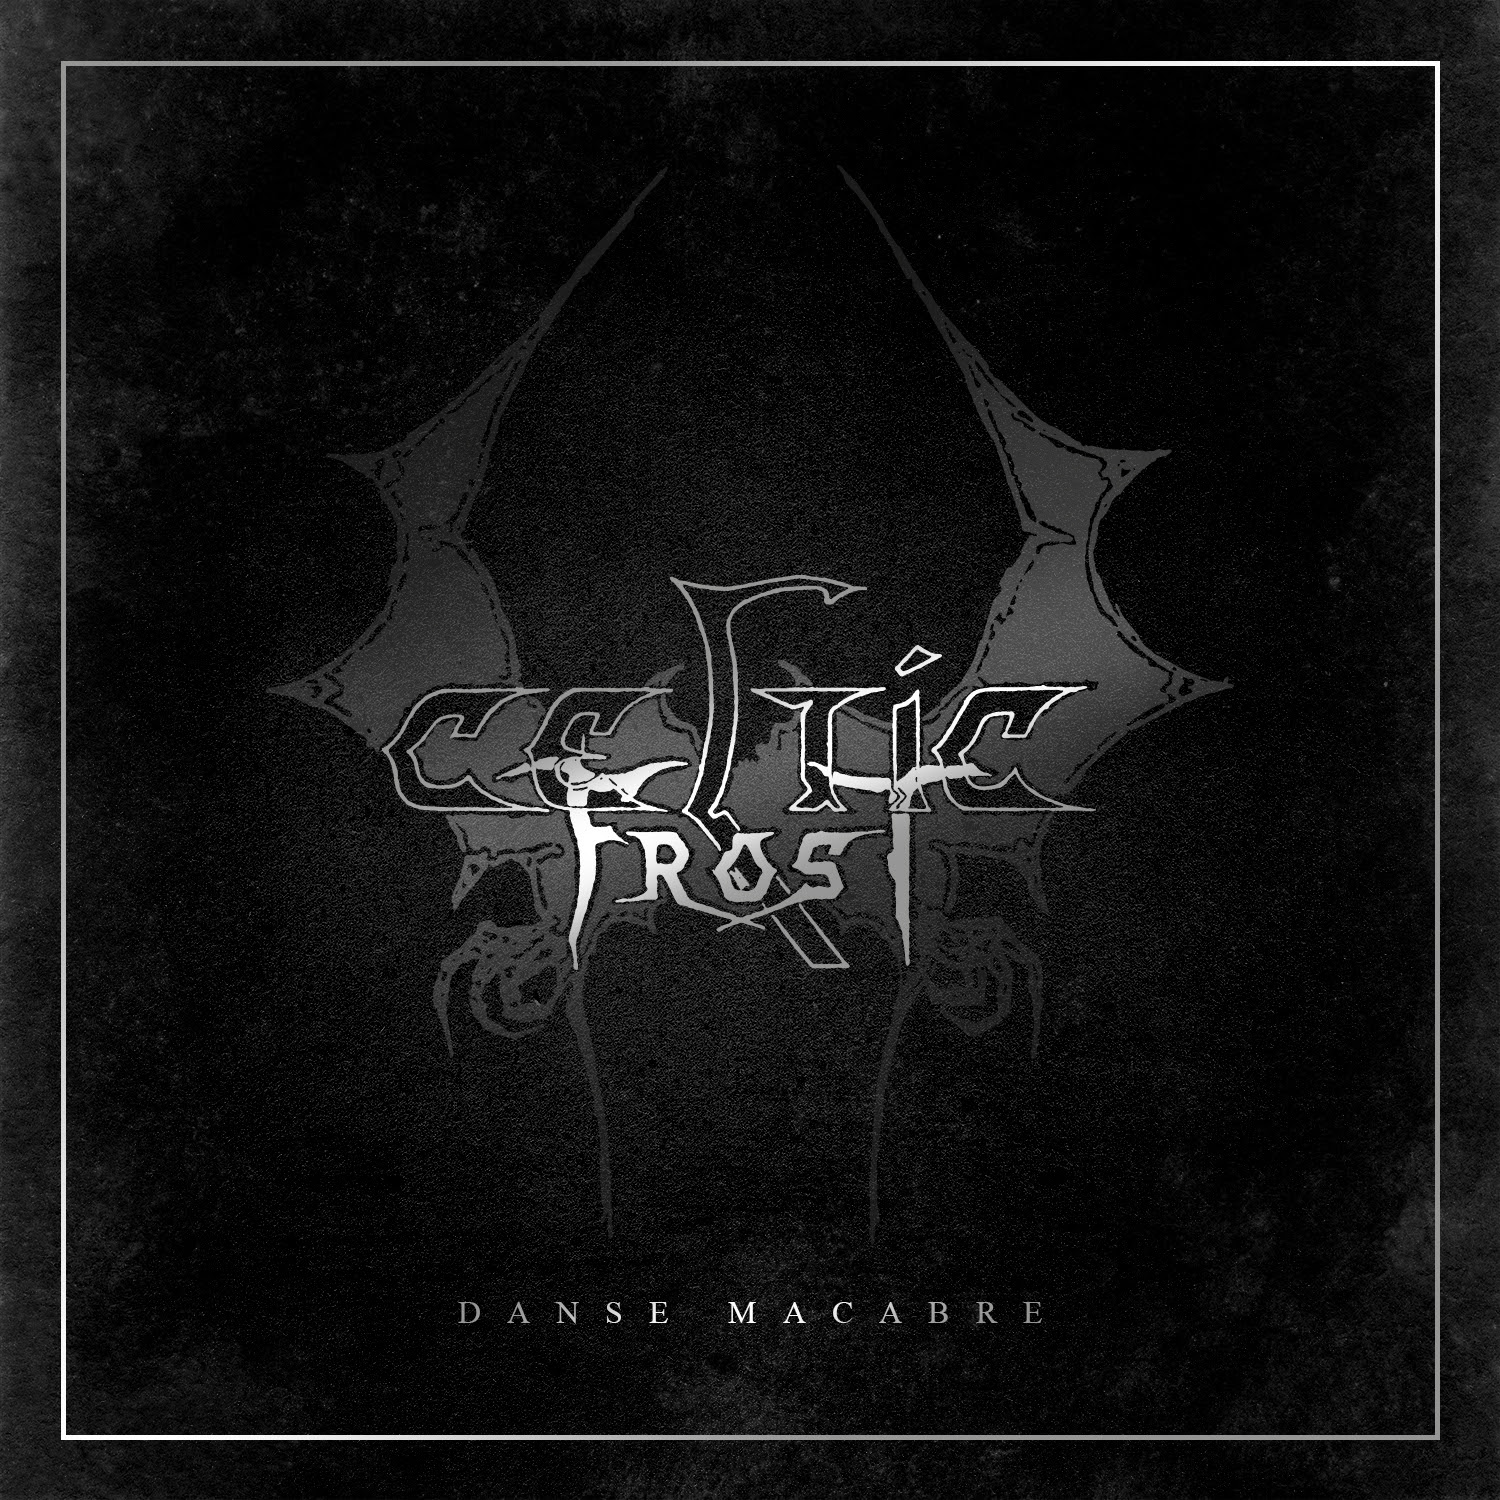 CELTIC FROST TO RELEASE ‘DANSE MACABRE’ SUPER DELUXE BOX-SET OF THE COMPLETE RECORDINGS: 1984 -1987